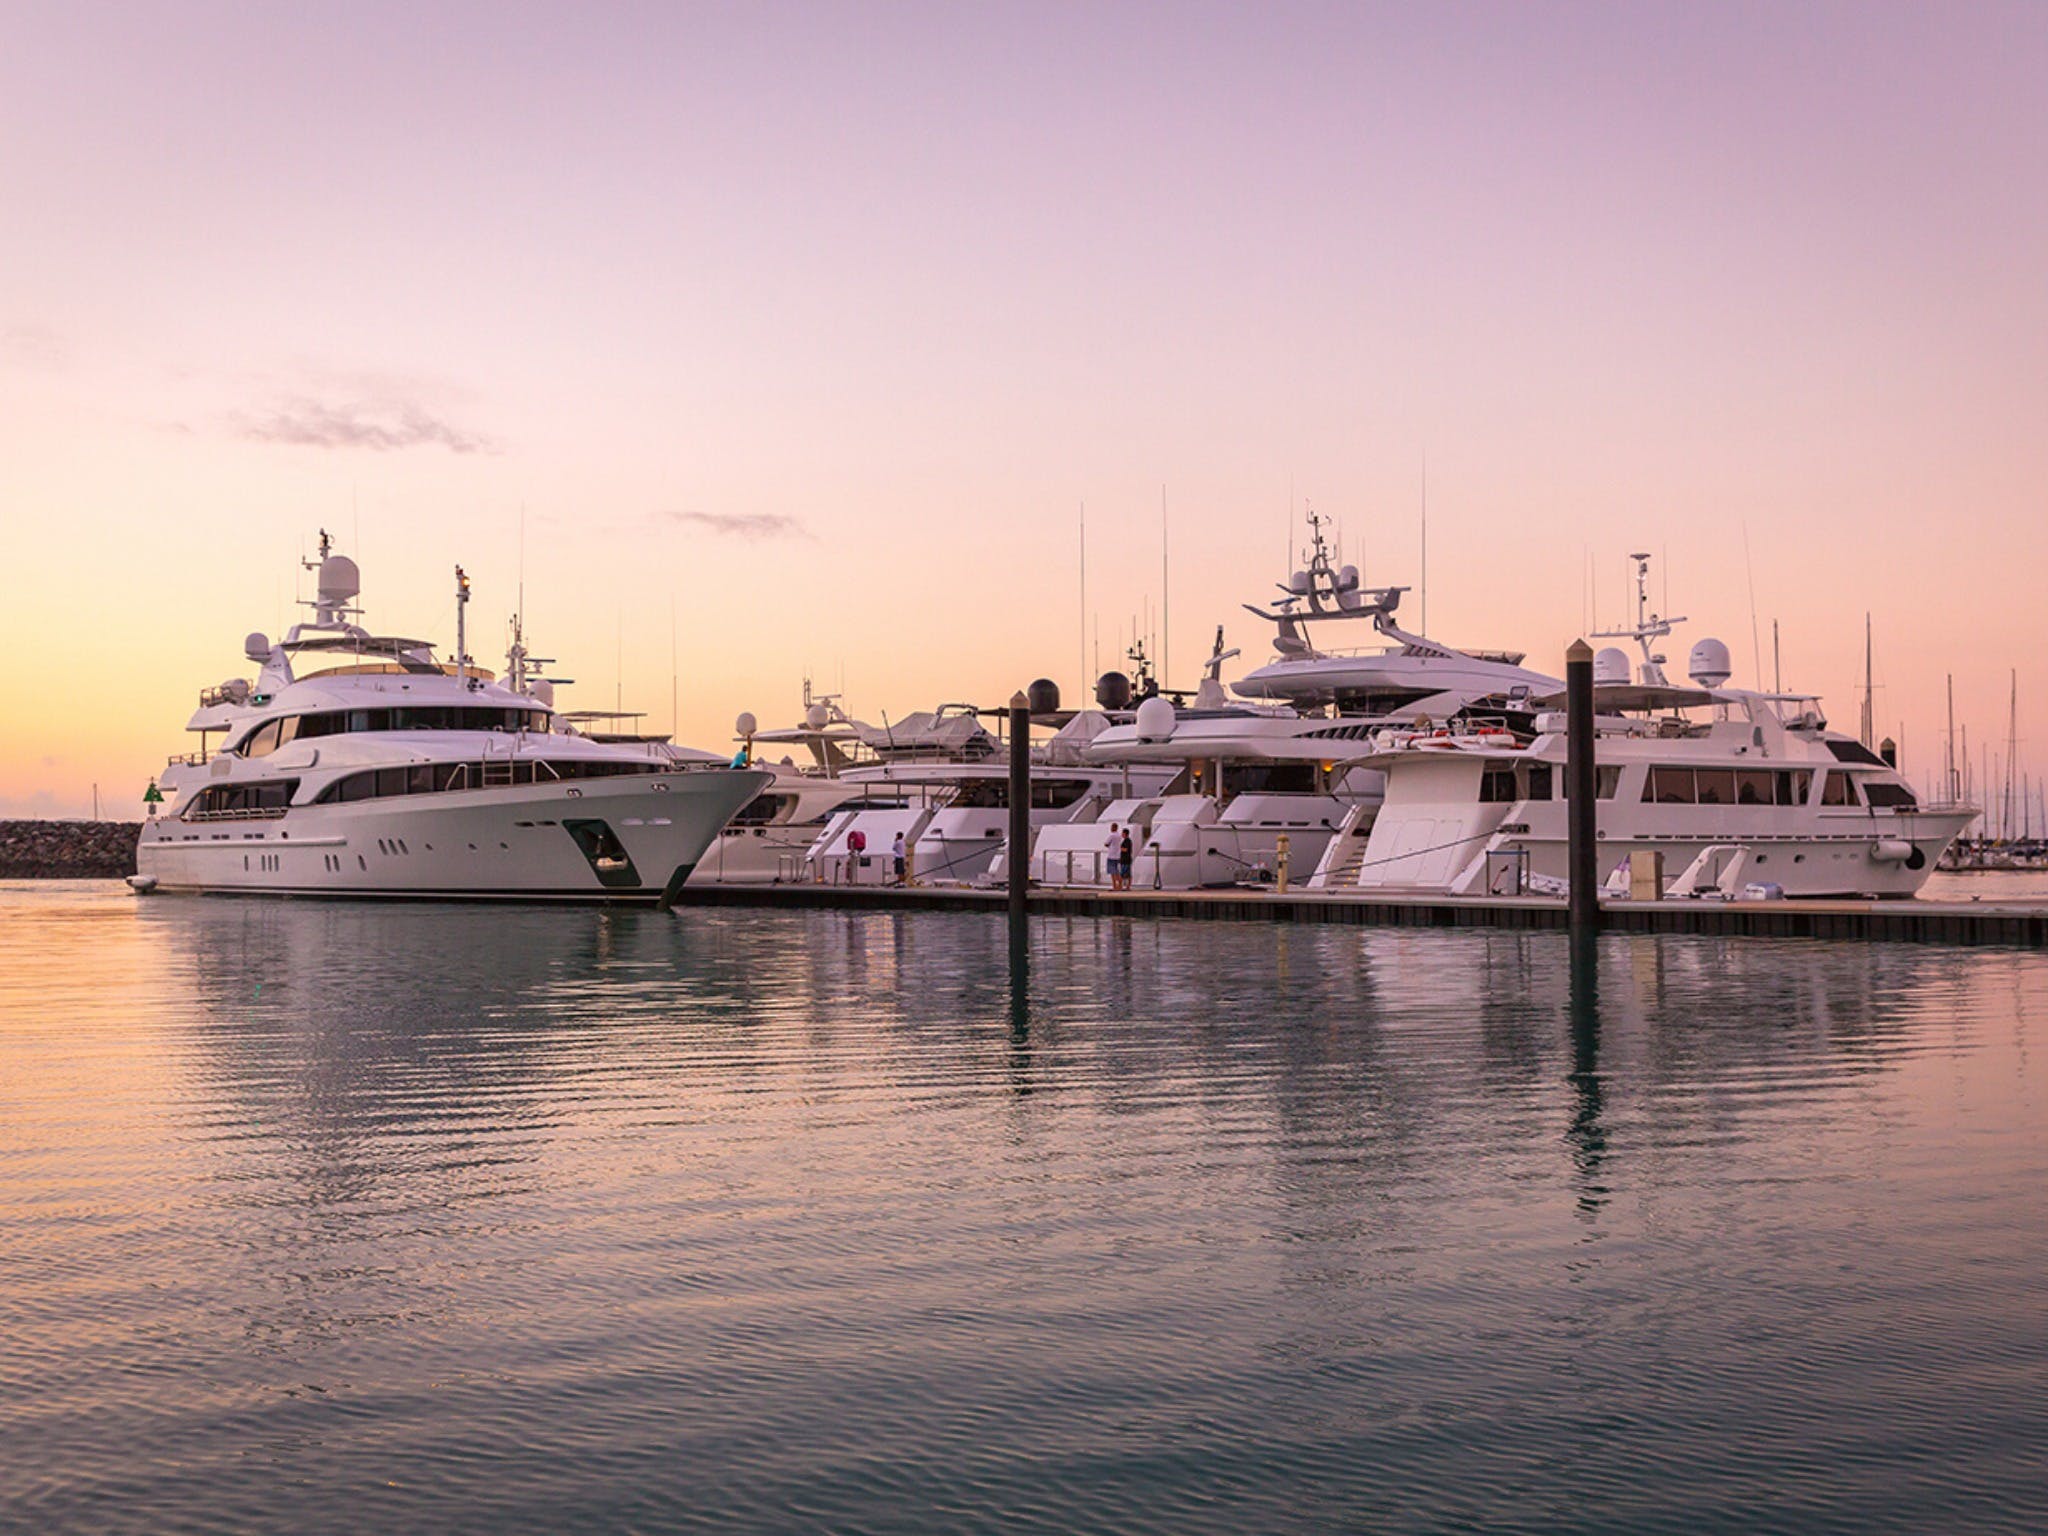 Australian Superyacht Rendezvous - Great Barrier Reef edition - Pubs and Clubs